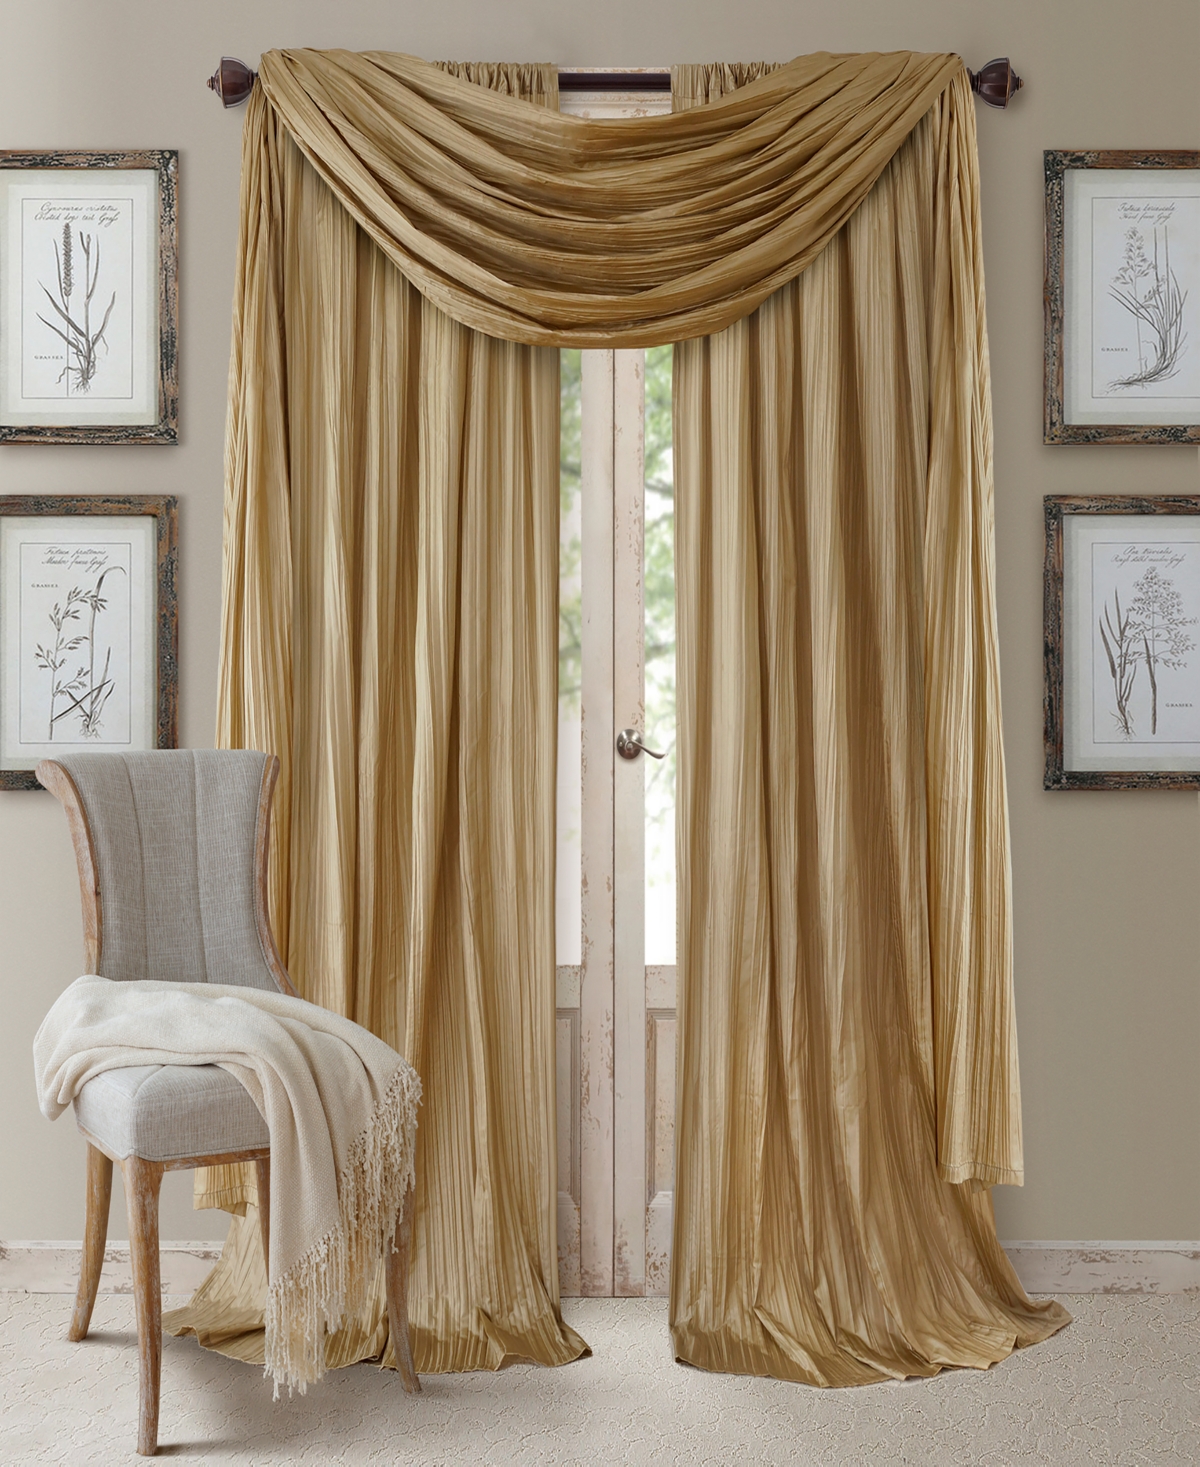 Athena Rod Pocket 52" x 95" Pair of Curtain Panels with Scarf Valance, Set of 3 - White